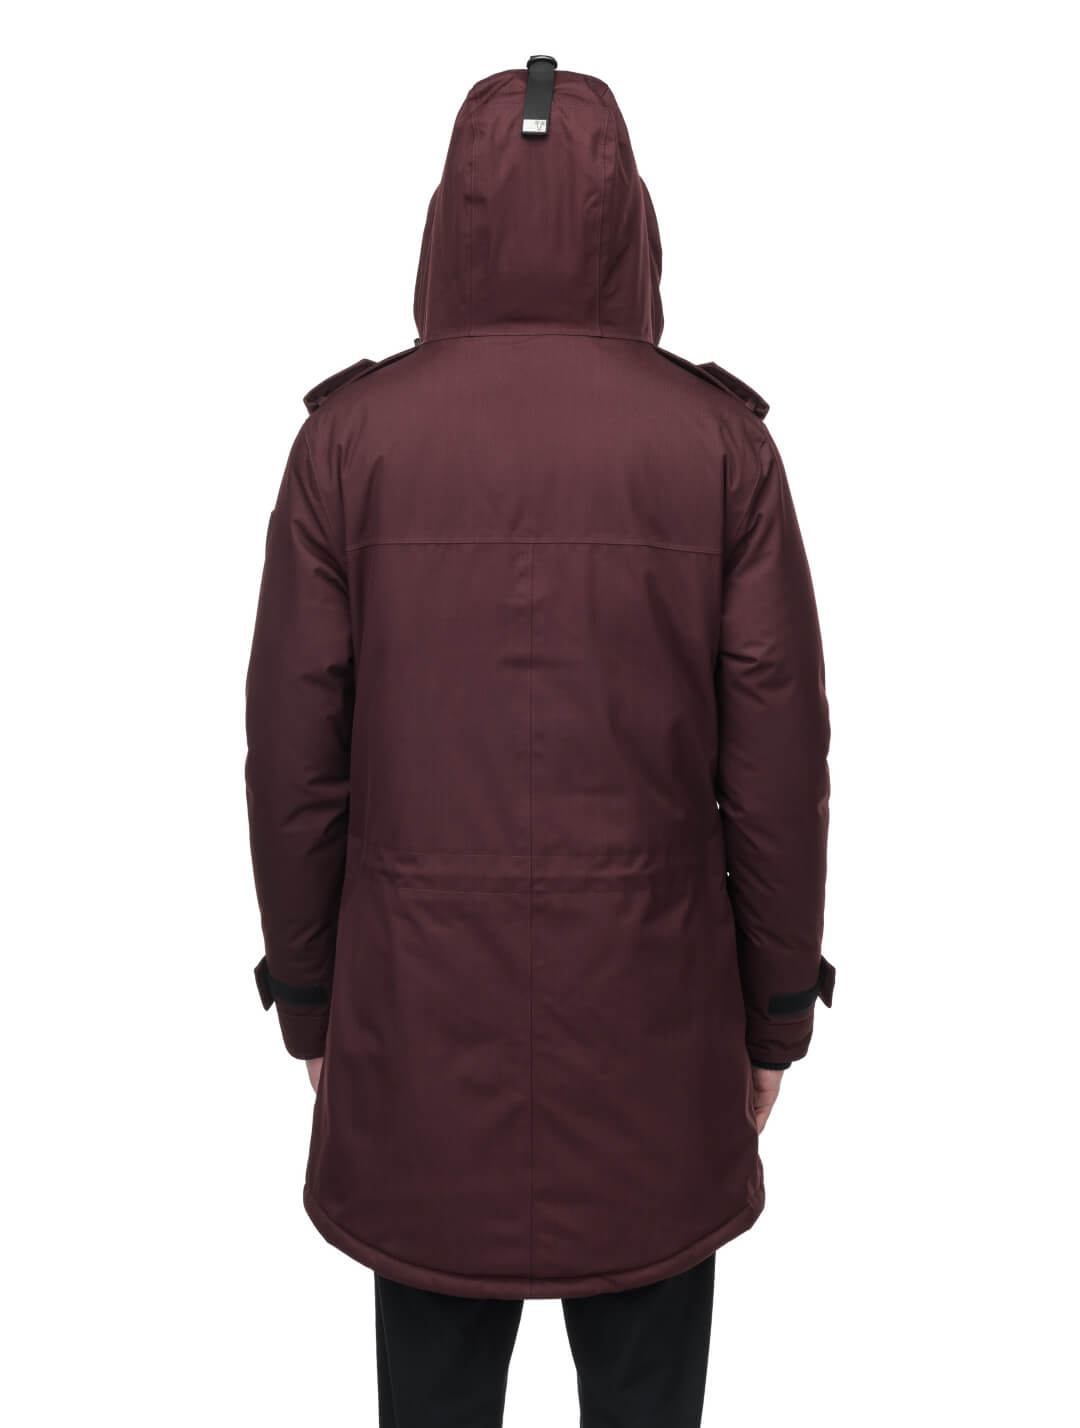 Men's down filled parka with faux button magnet closures and fur free hood with a fishtail hemline in Merlot